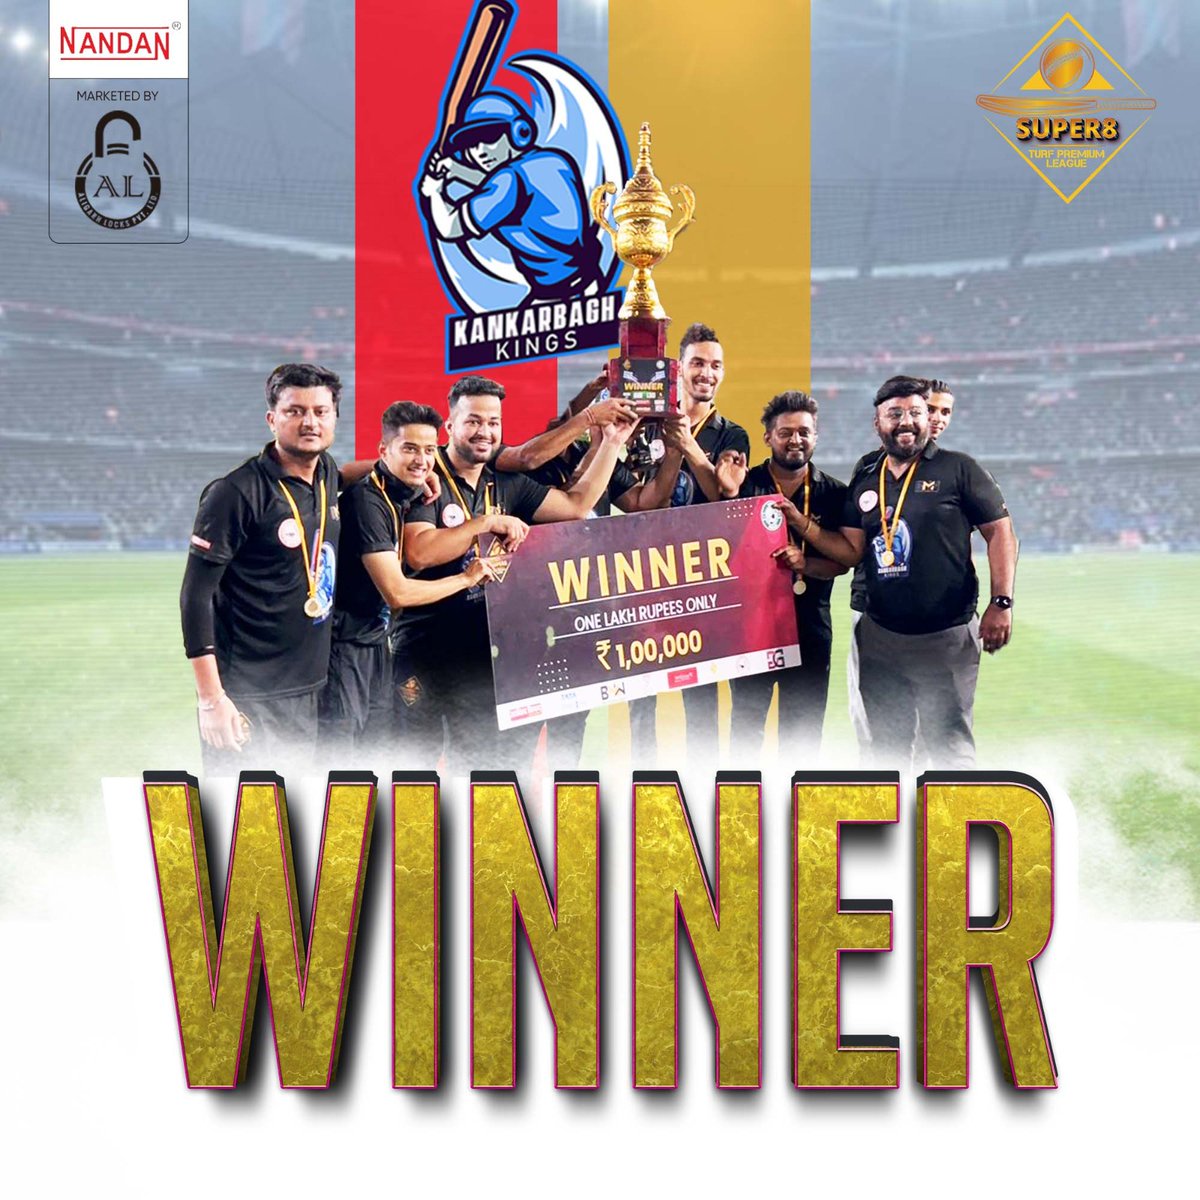 Congratulations To
Kankarbagh Kings  On Winning
Bihar's First Box Cricket League  i.e
Super8 Turf Premium League
.
.
.
#cricket #boxcricket #turfarena #boxcricketleague